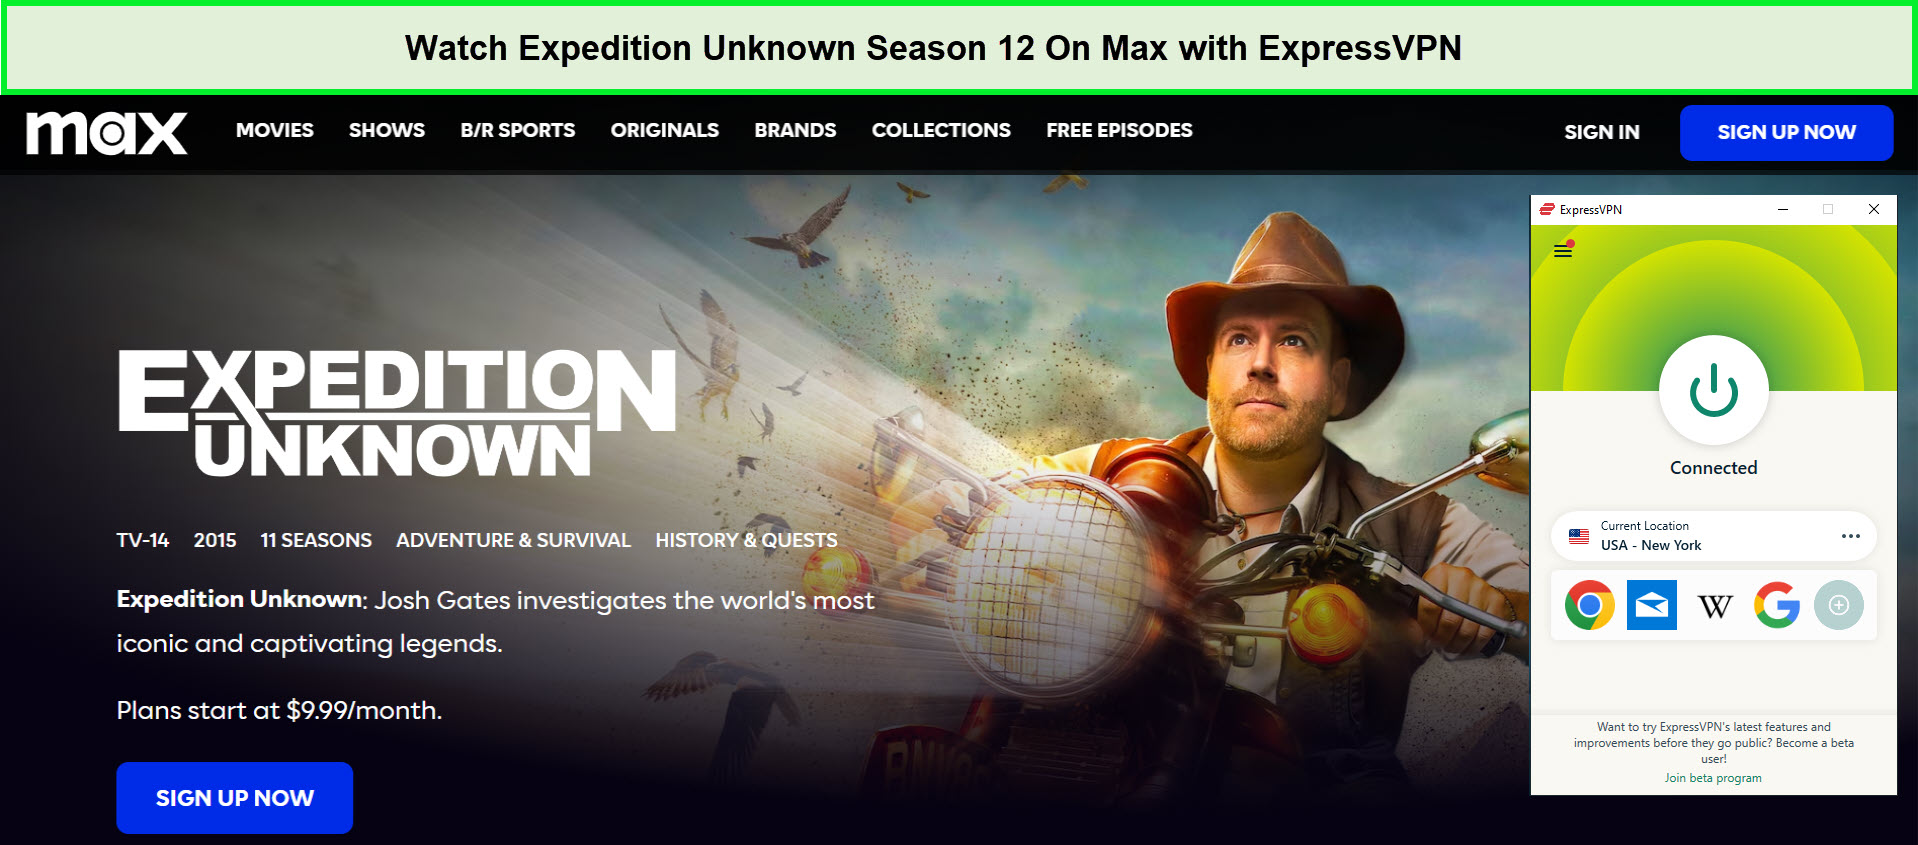 Watch-Expedition-Unknown-Season-12-in-India-On-Max-with-ExpressVPN